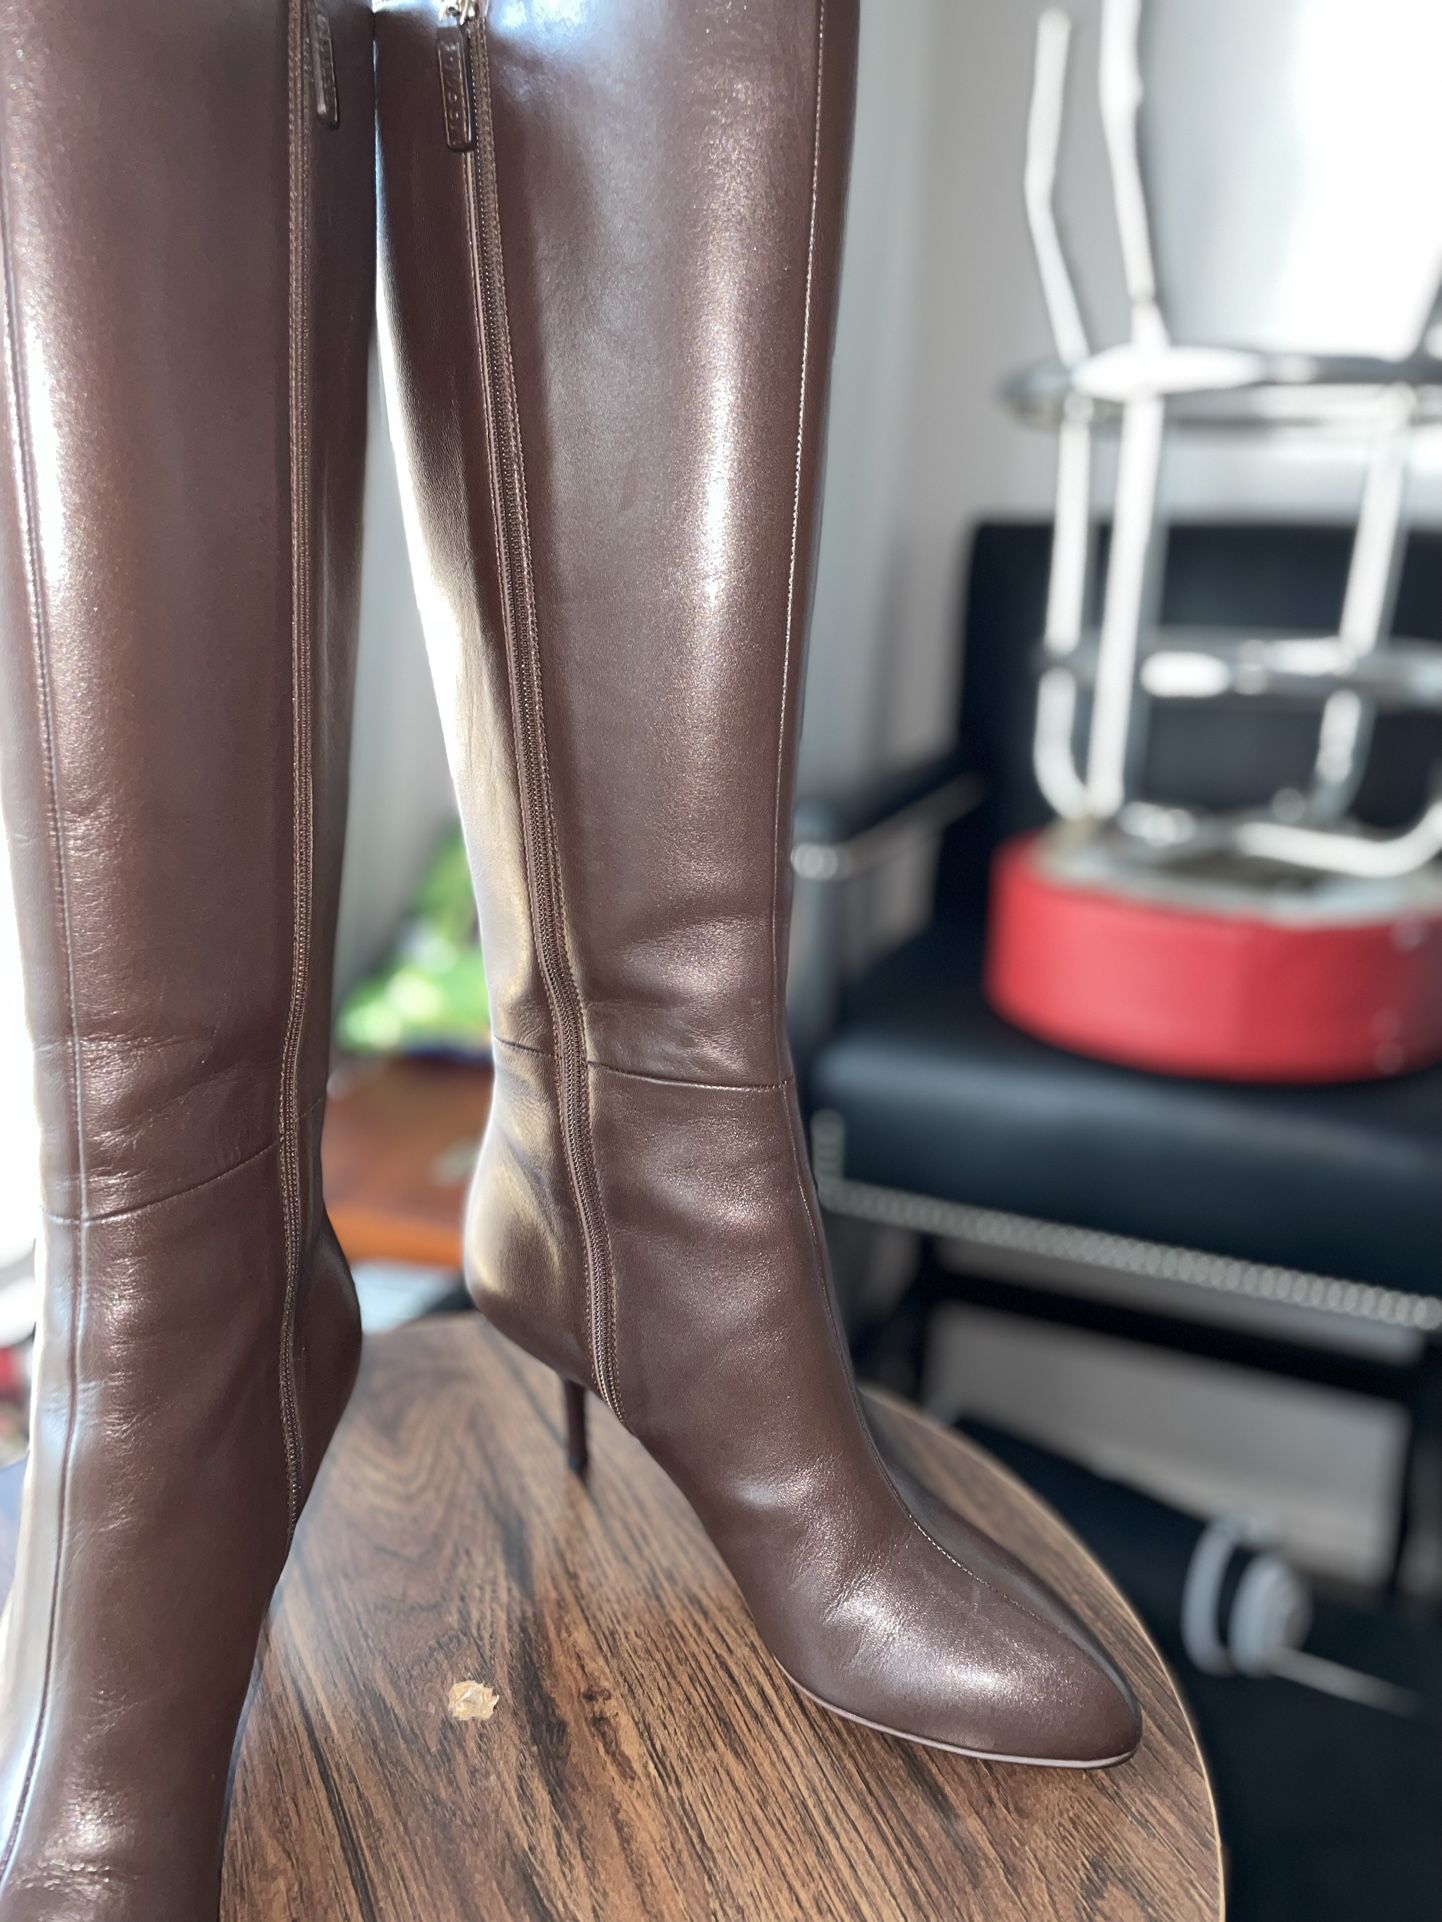 Gucci Black Knee High Boots 36.5 6.5 for Sale in Tustin, CA - OfferUp